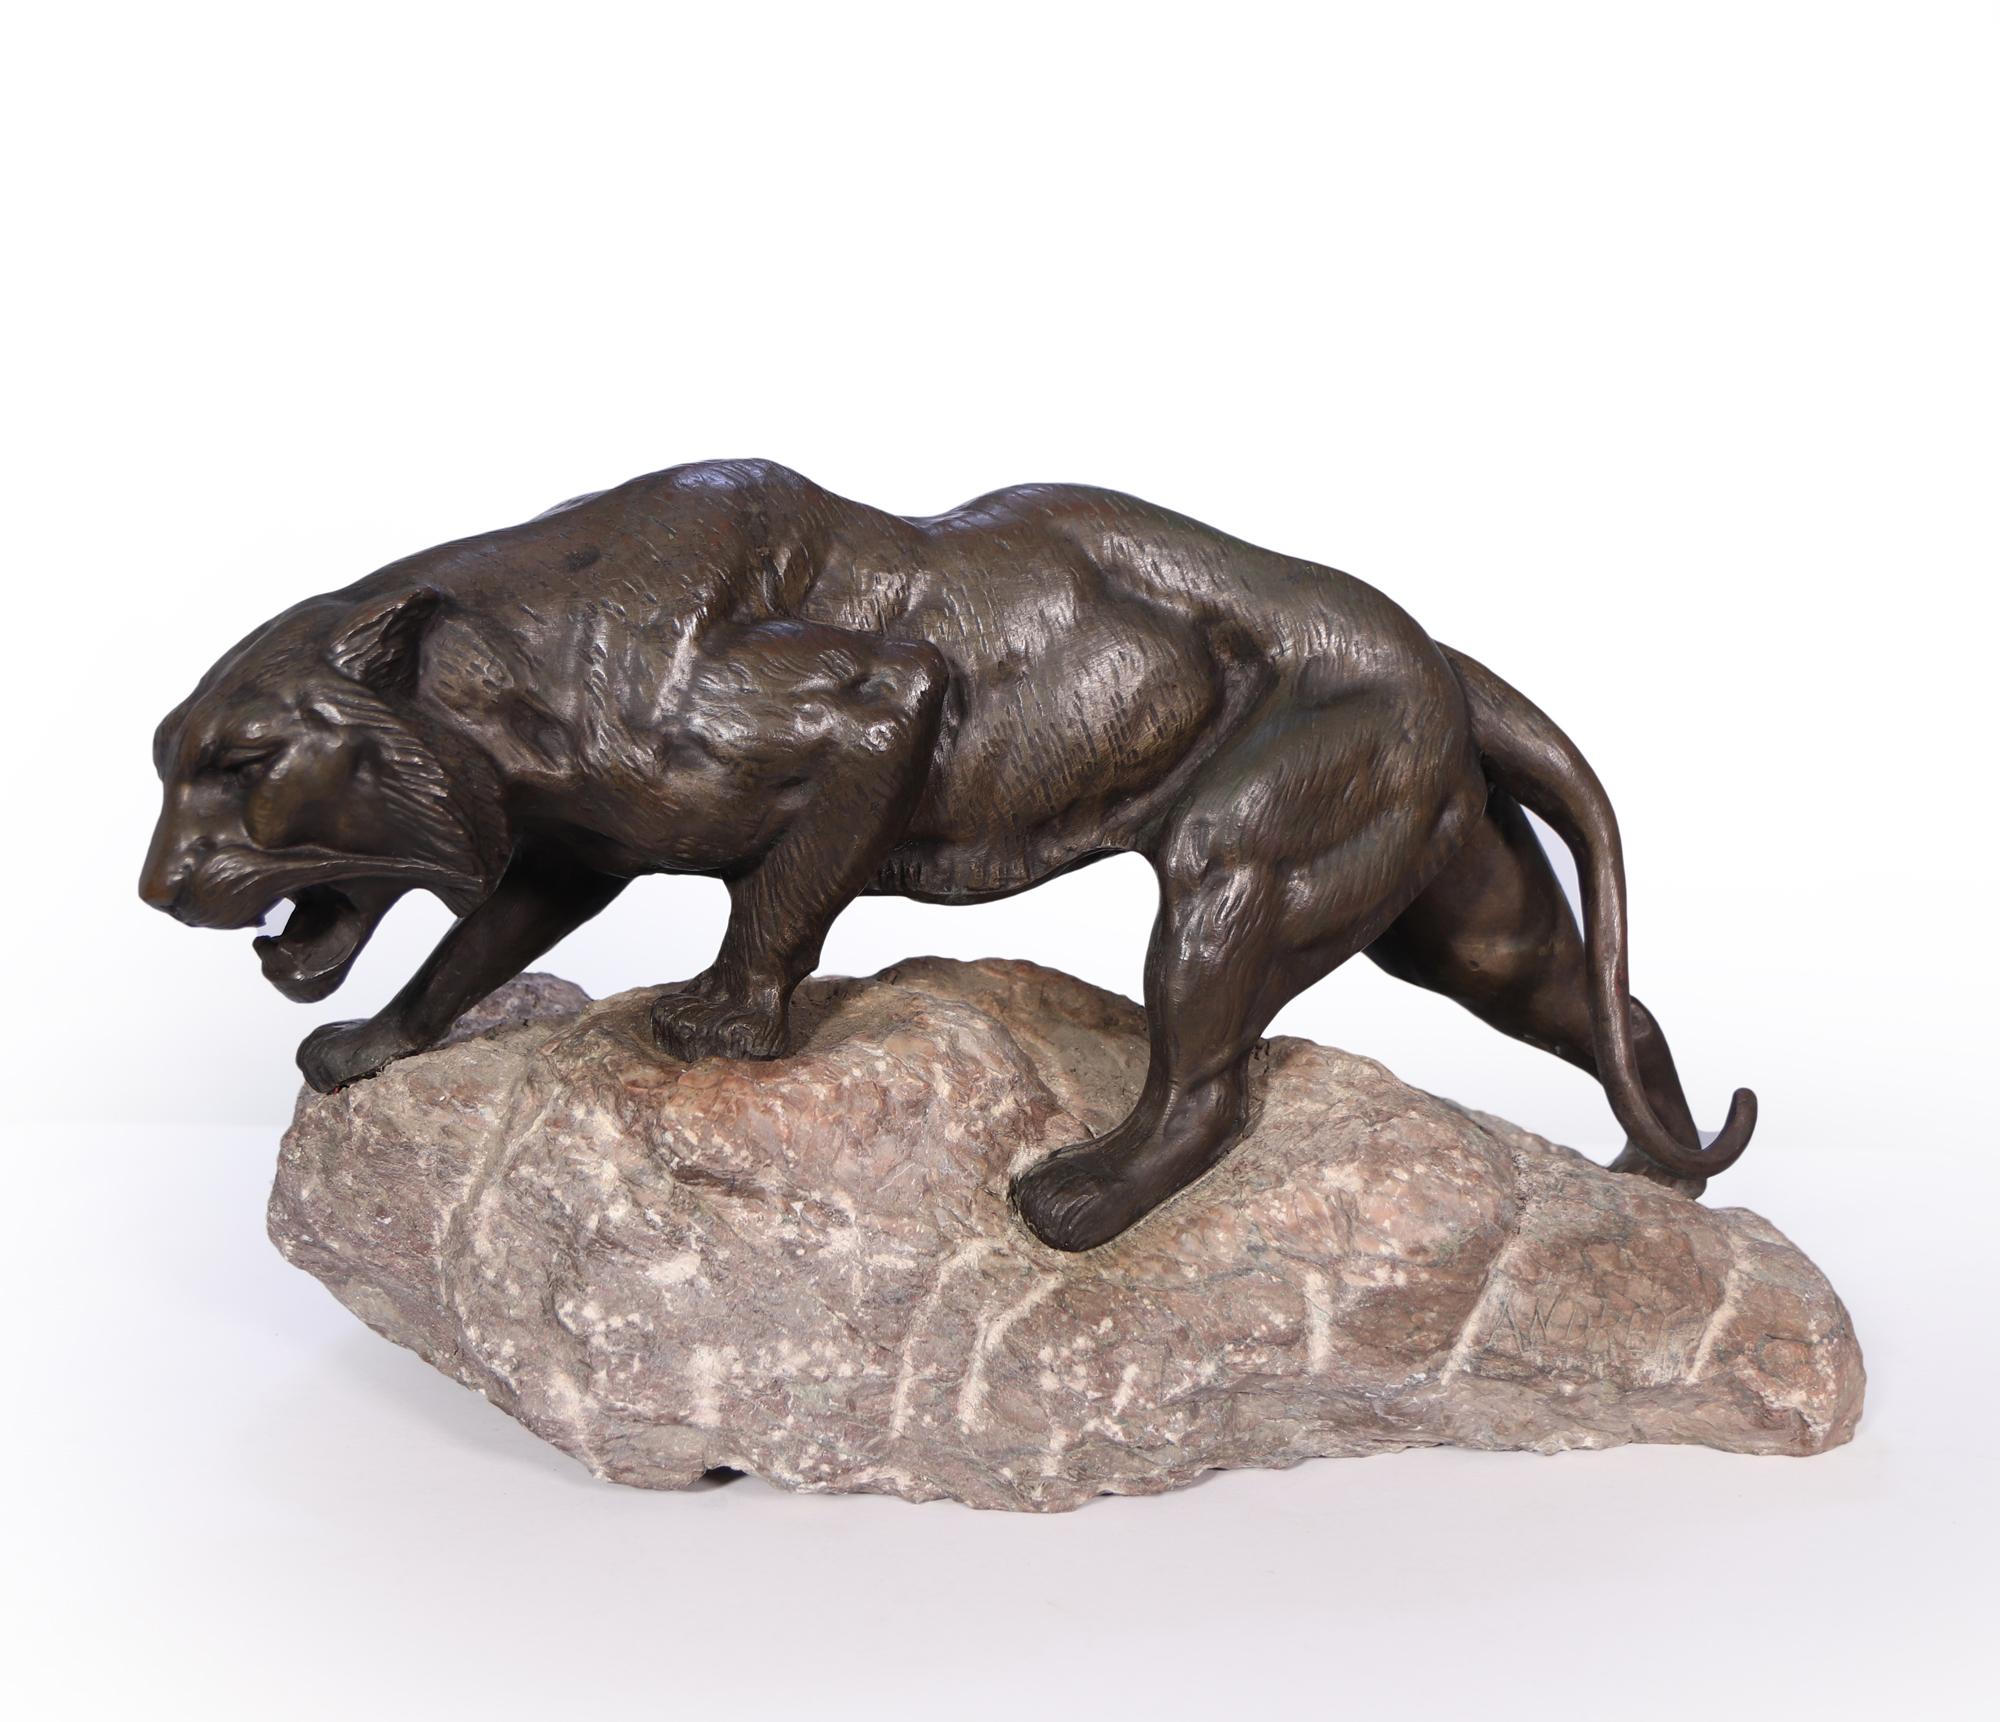 A cast Bronze Tiger by James Andrey produced in the 1920’s in France, this Tiger has been fitted to a rough cut marble base with ANDREY inscribed

Age: 1920

Style: Bronze Sculpture

Material: Bronze

Origin : France

Condition: Very